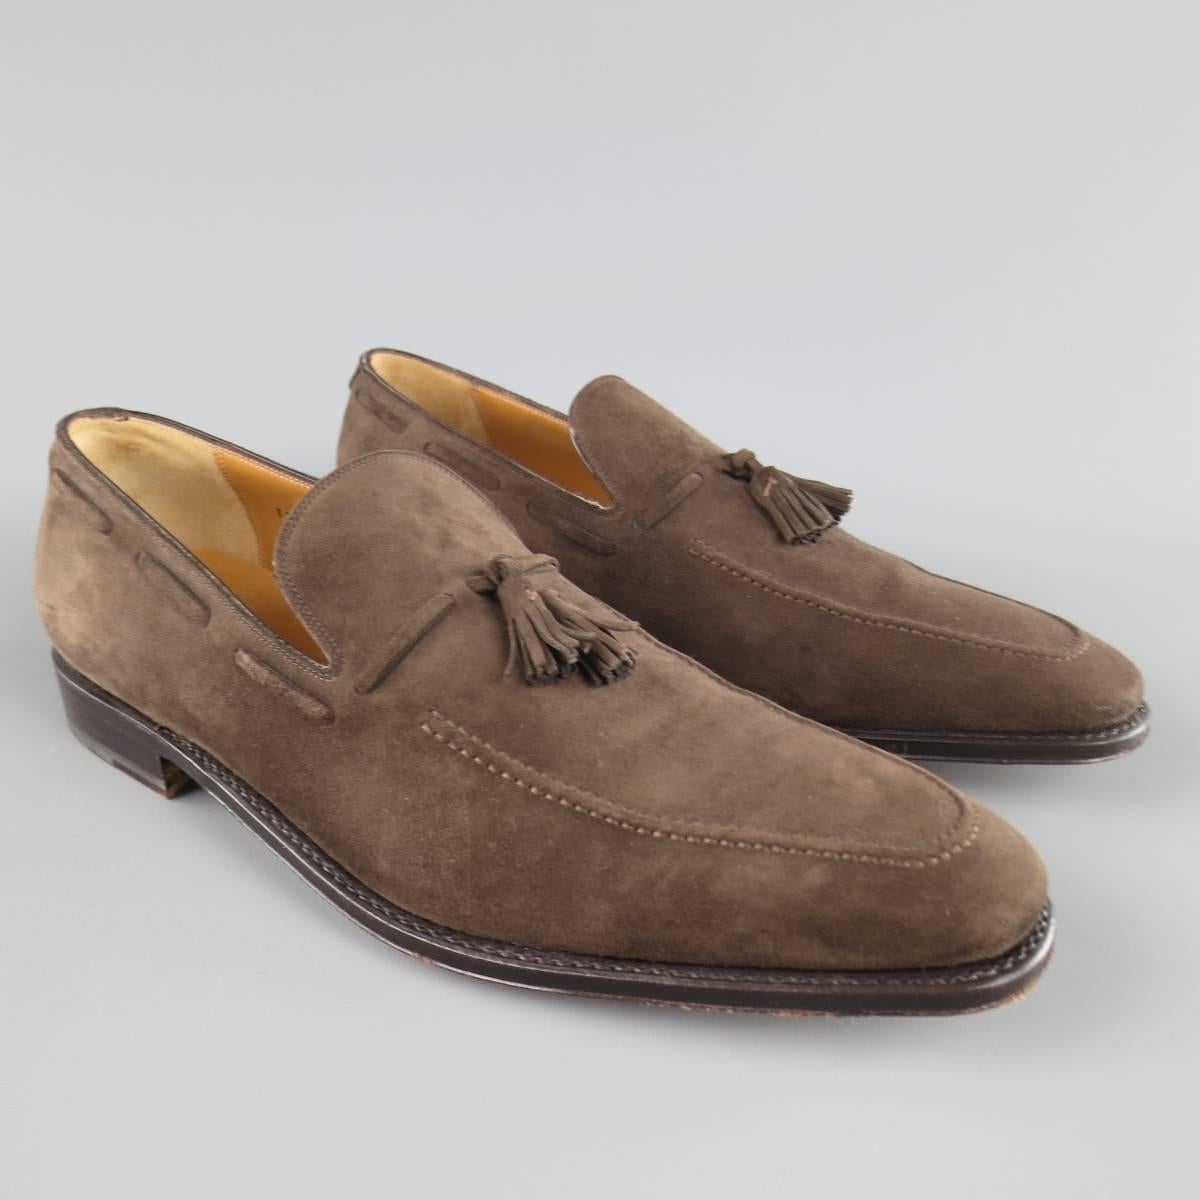 SALVATORE FERRAGAMO Loafers consists of suede material in a brown color tone. Designed with a pointed round-toe front, top tone-on-tone stitching and suede tassels. Leather sole with rubber heel. Made in Italy.
 
Excellent Pre-Owned Condition
Marked